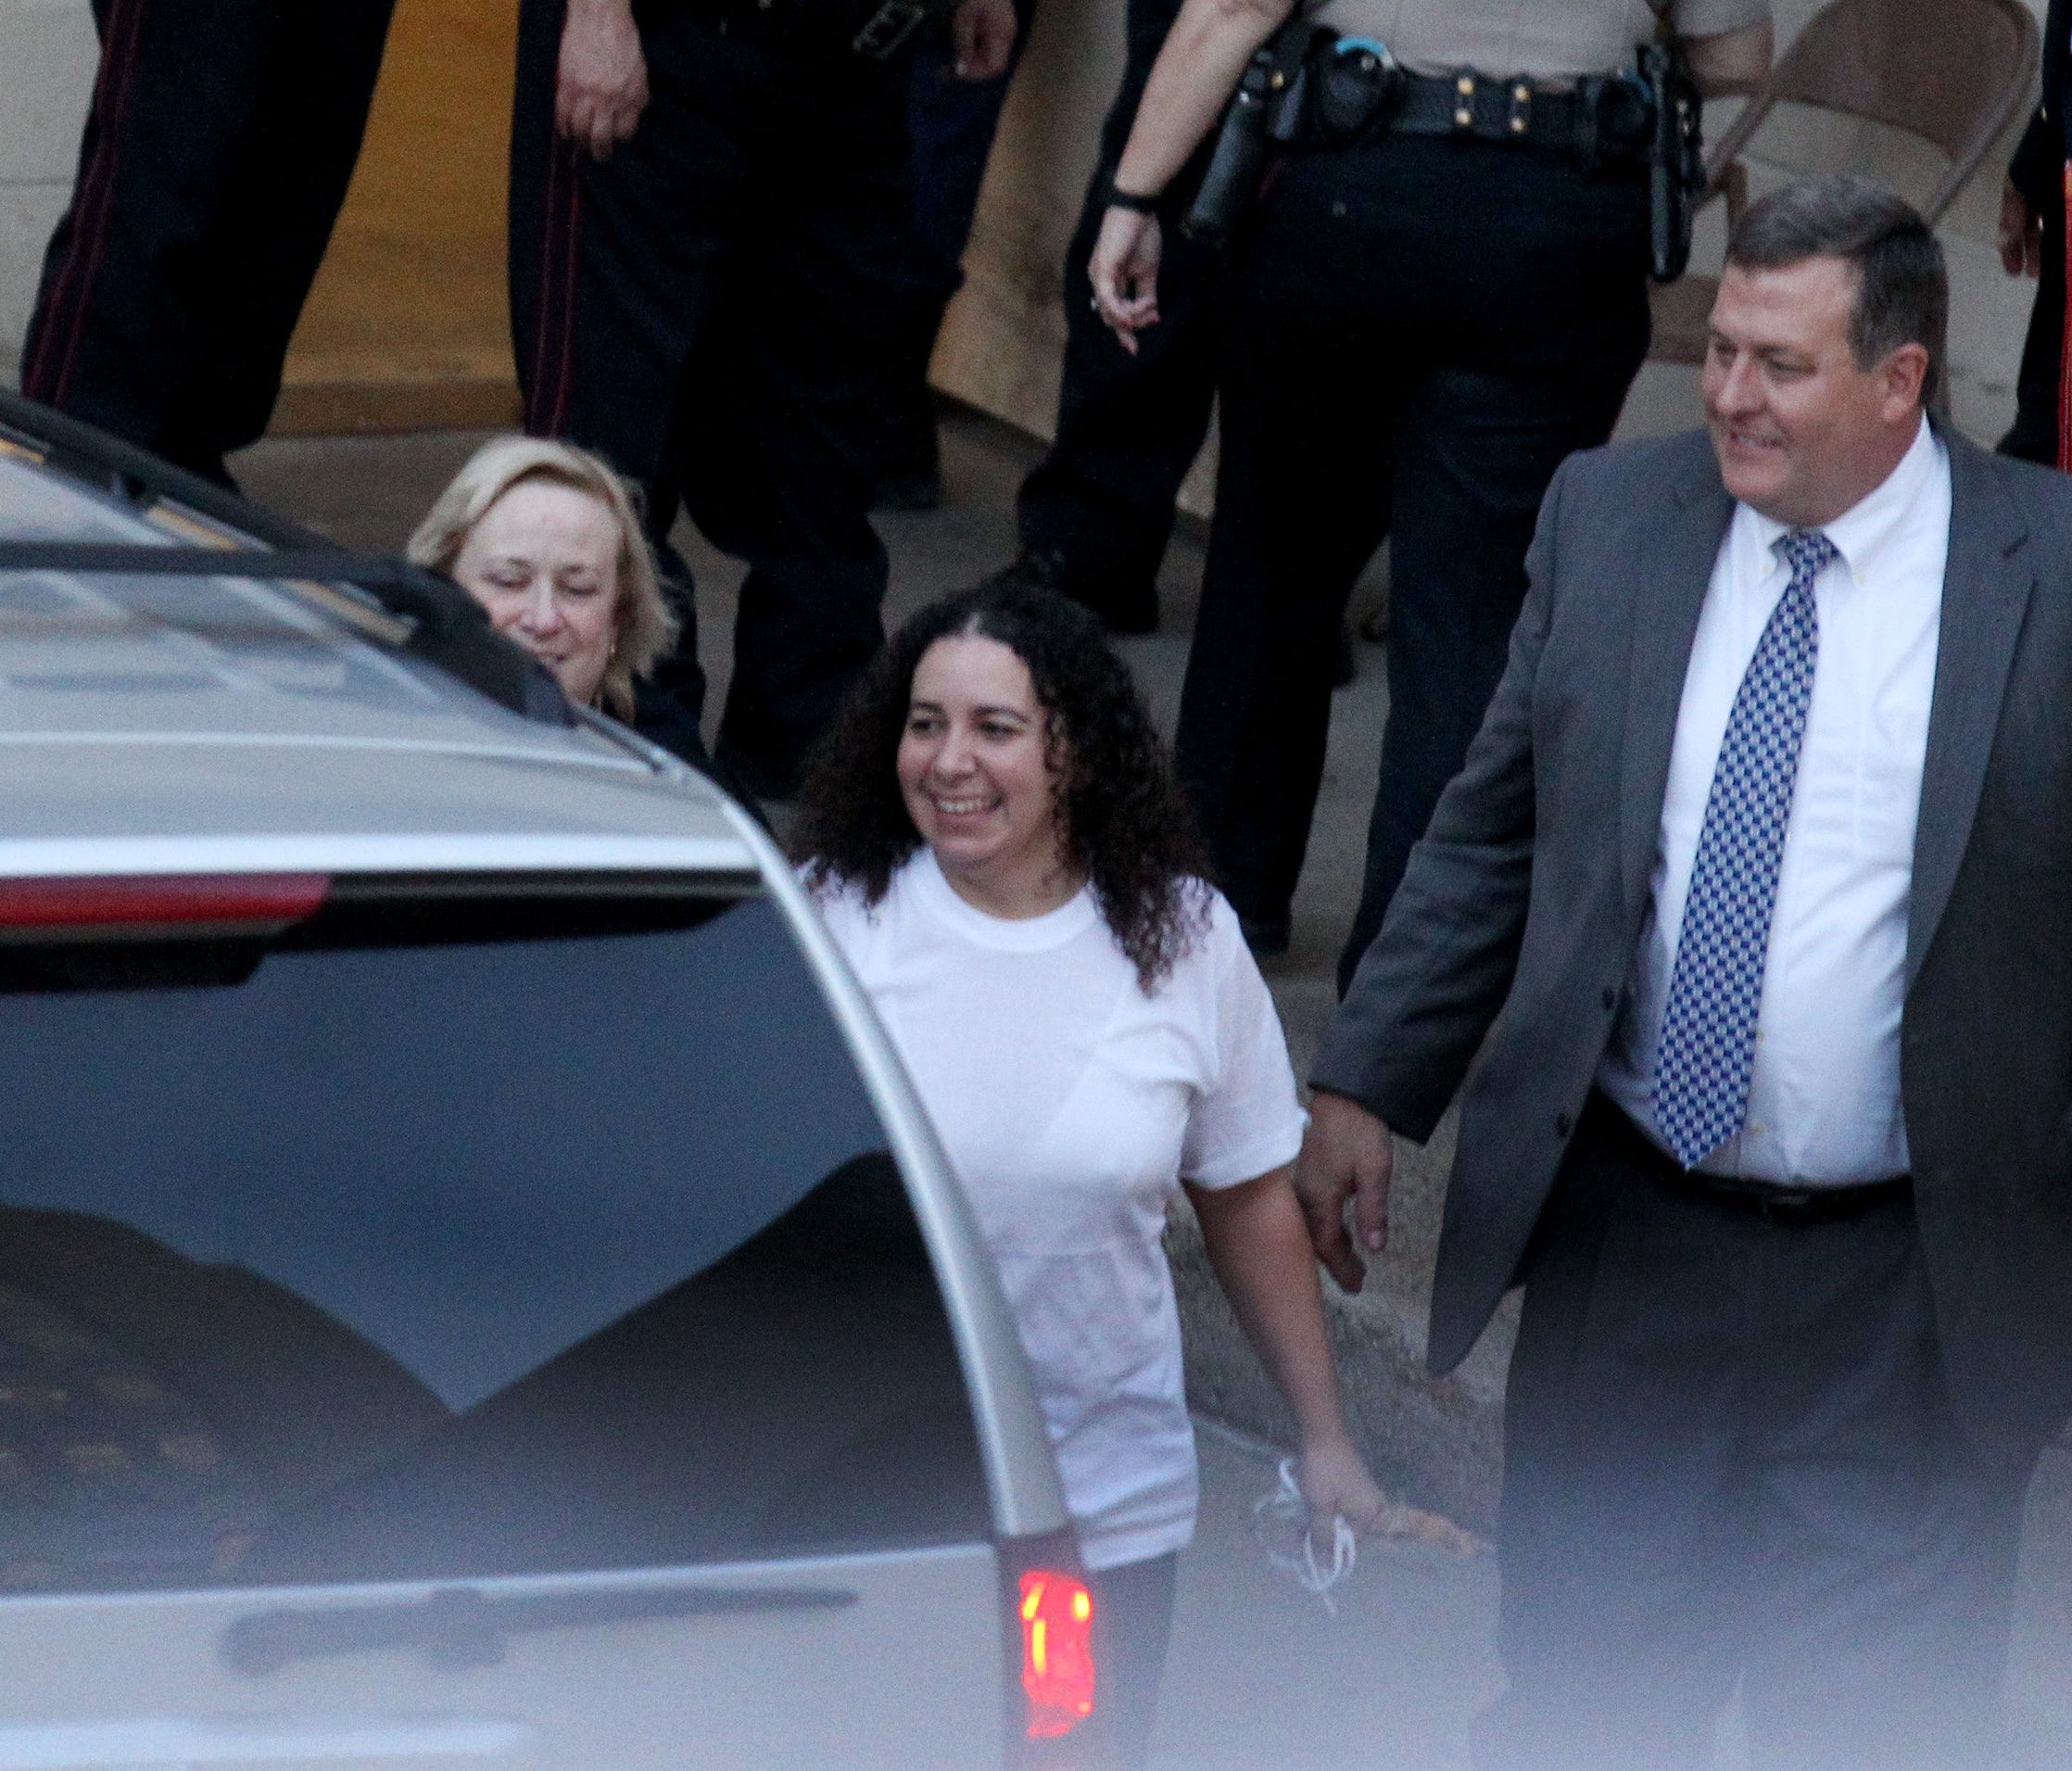 Caller-Times file photo  Hannah Overton (center) smiles as attorneys Cynthia Orr (left) and John Raley (right) escort Overton out of the Nueces County Jail Tuesday, Dec. 16, 2015 following a bail hearing at the Nueces County Courthouse in Corpus Chris